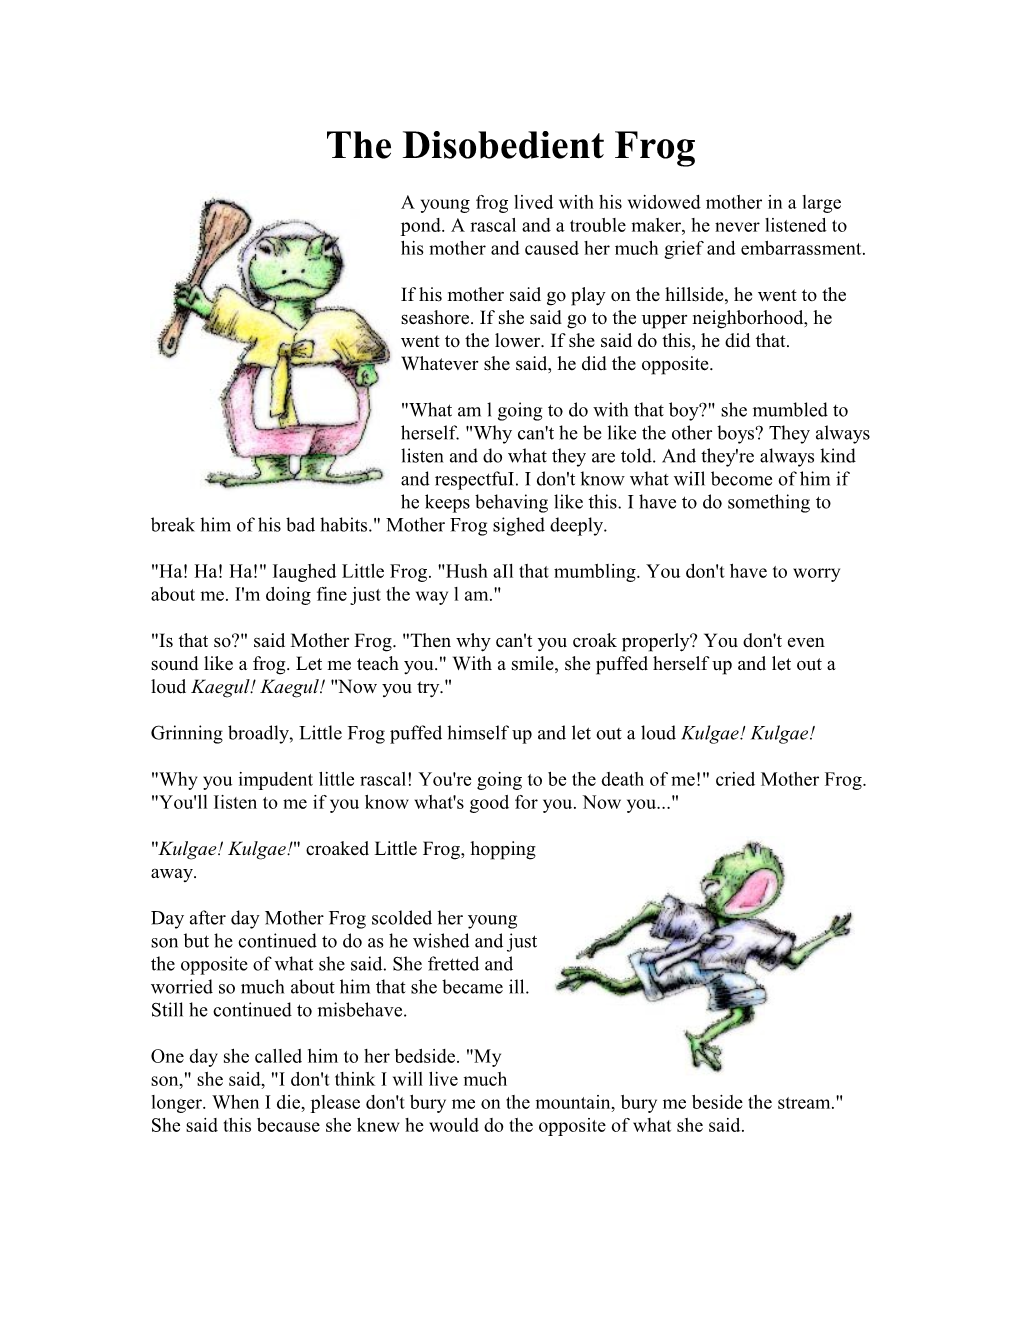 The Disobedient Frog